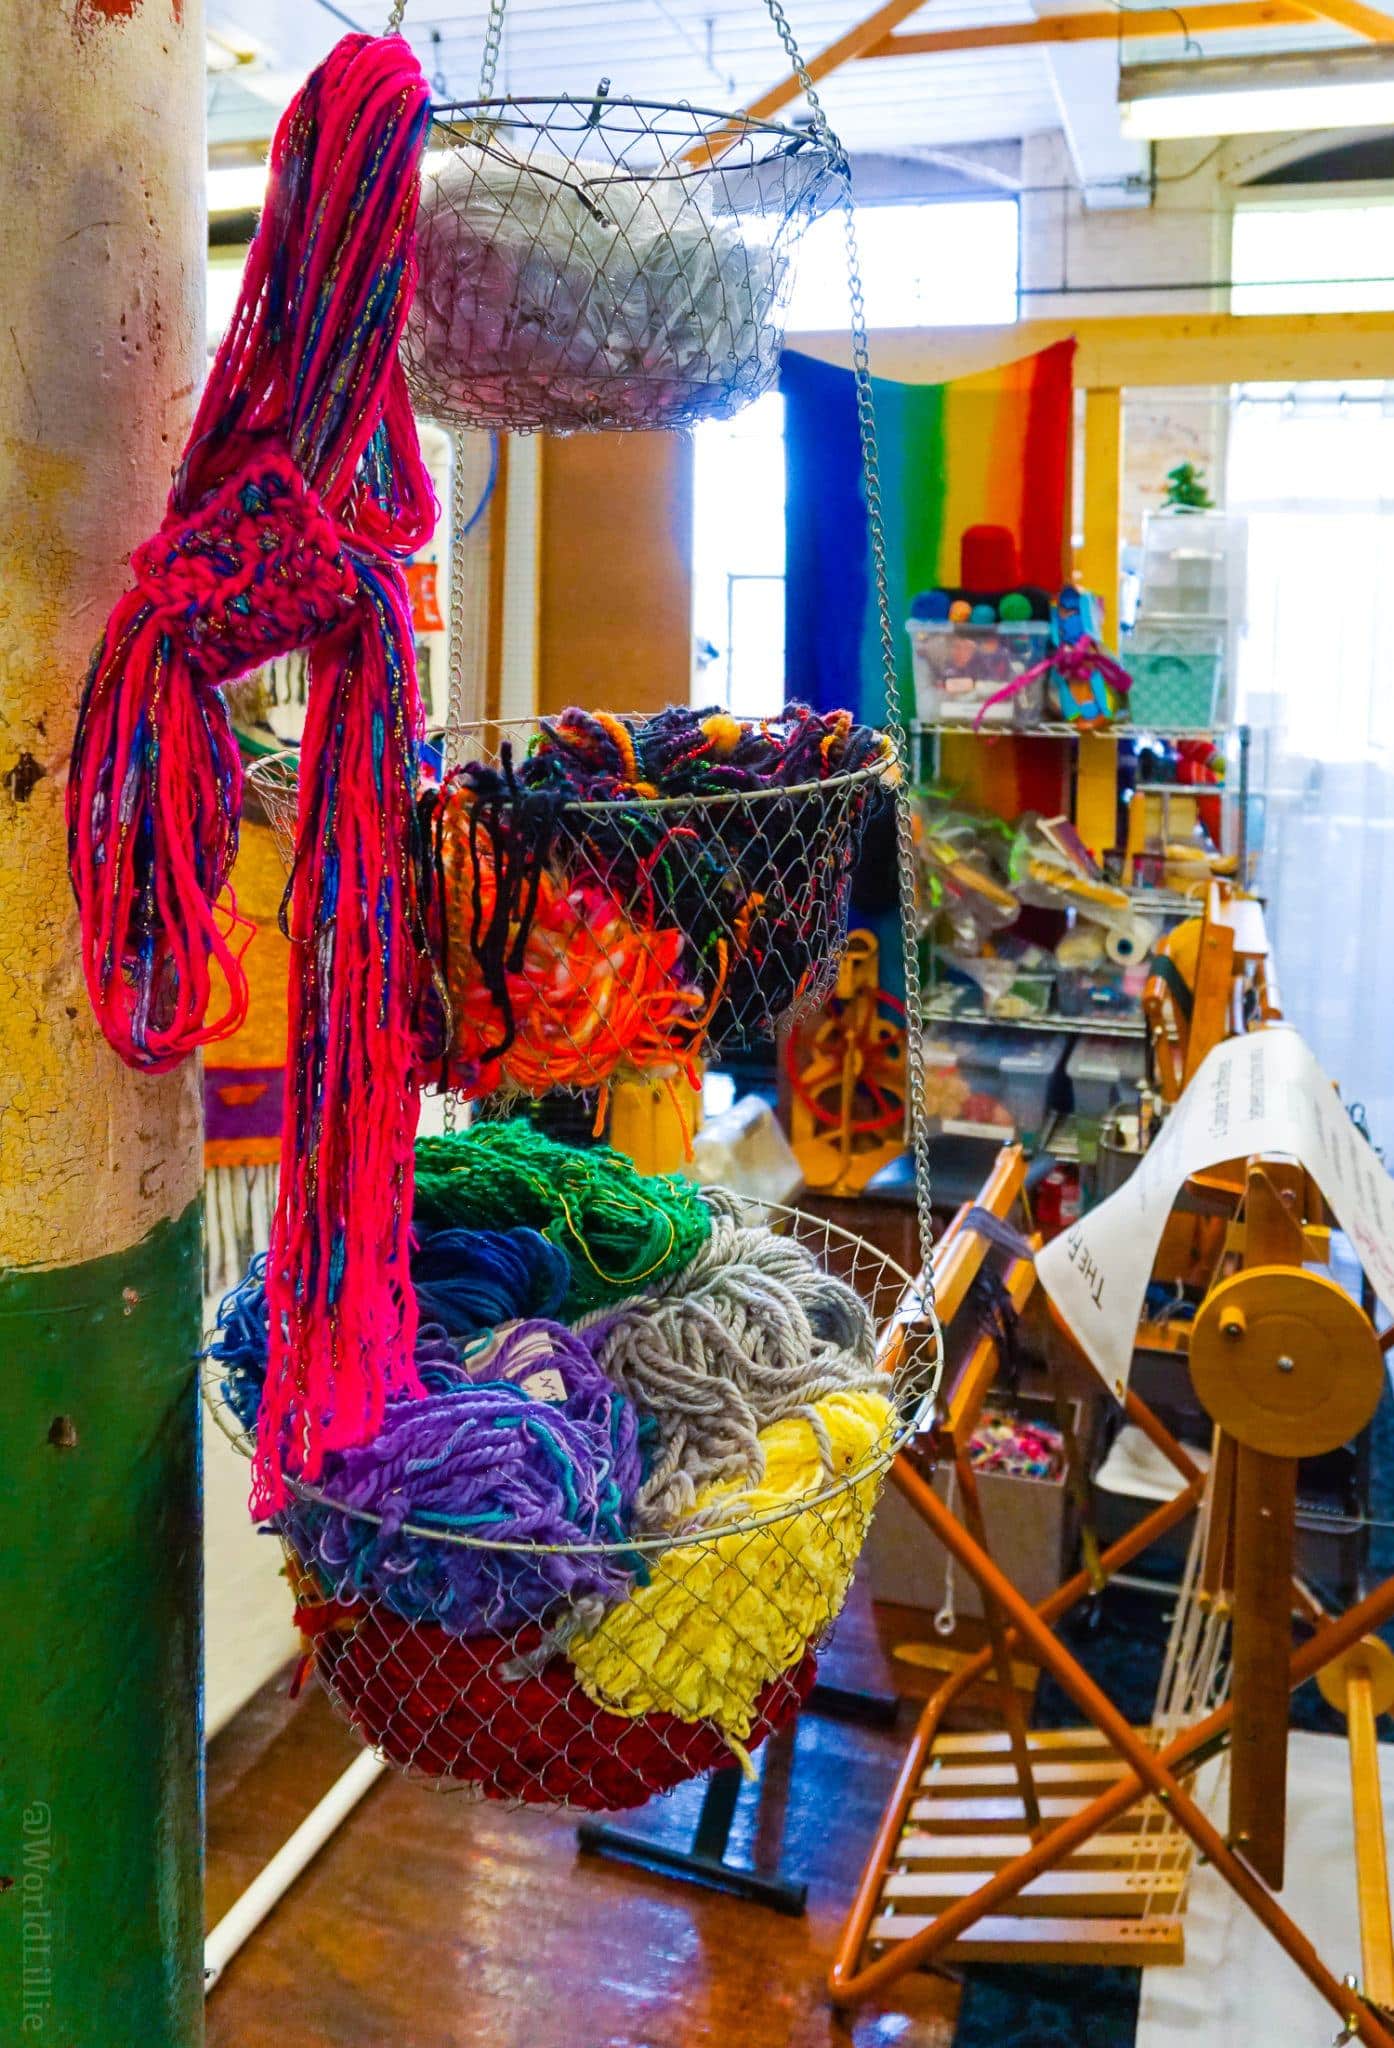 Every detail of Lowe Mill bursts with color and creativity.